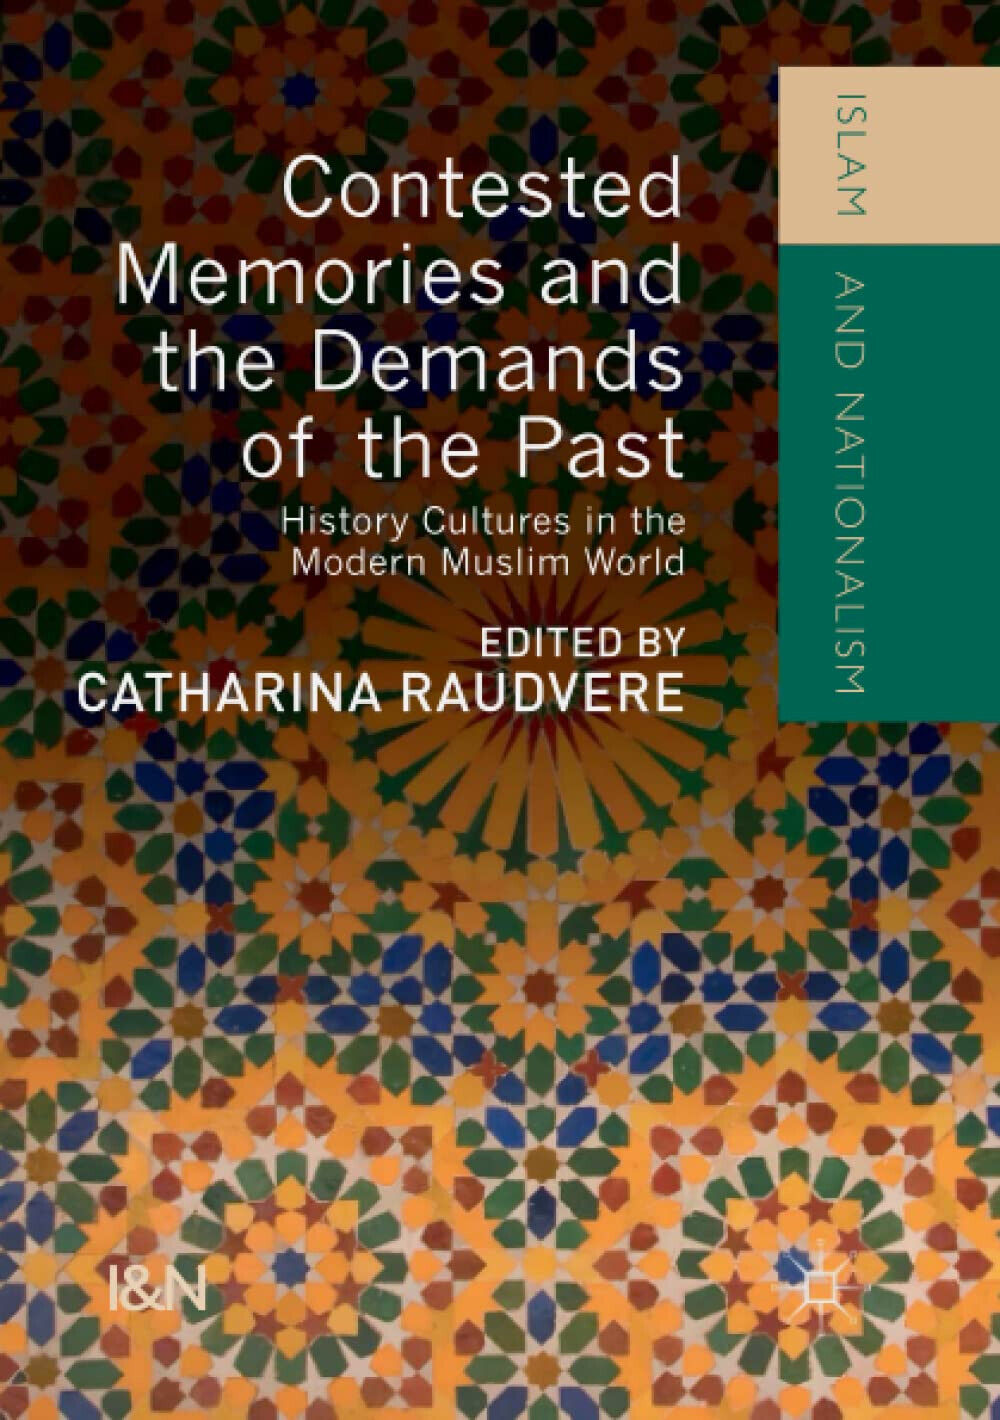 Contested Memories and the Demands of the Past - Catharina Raudvere - 2018